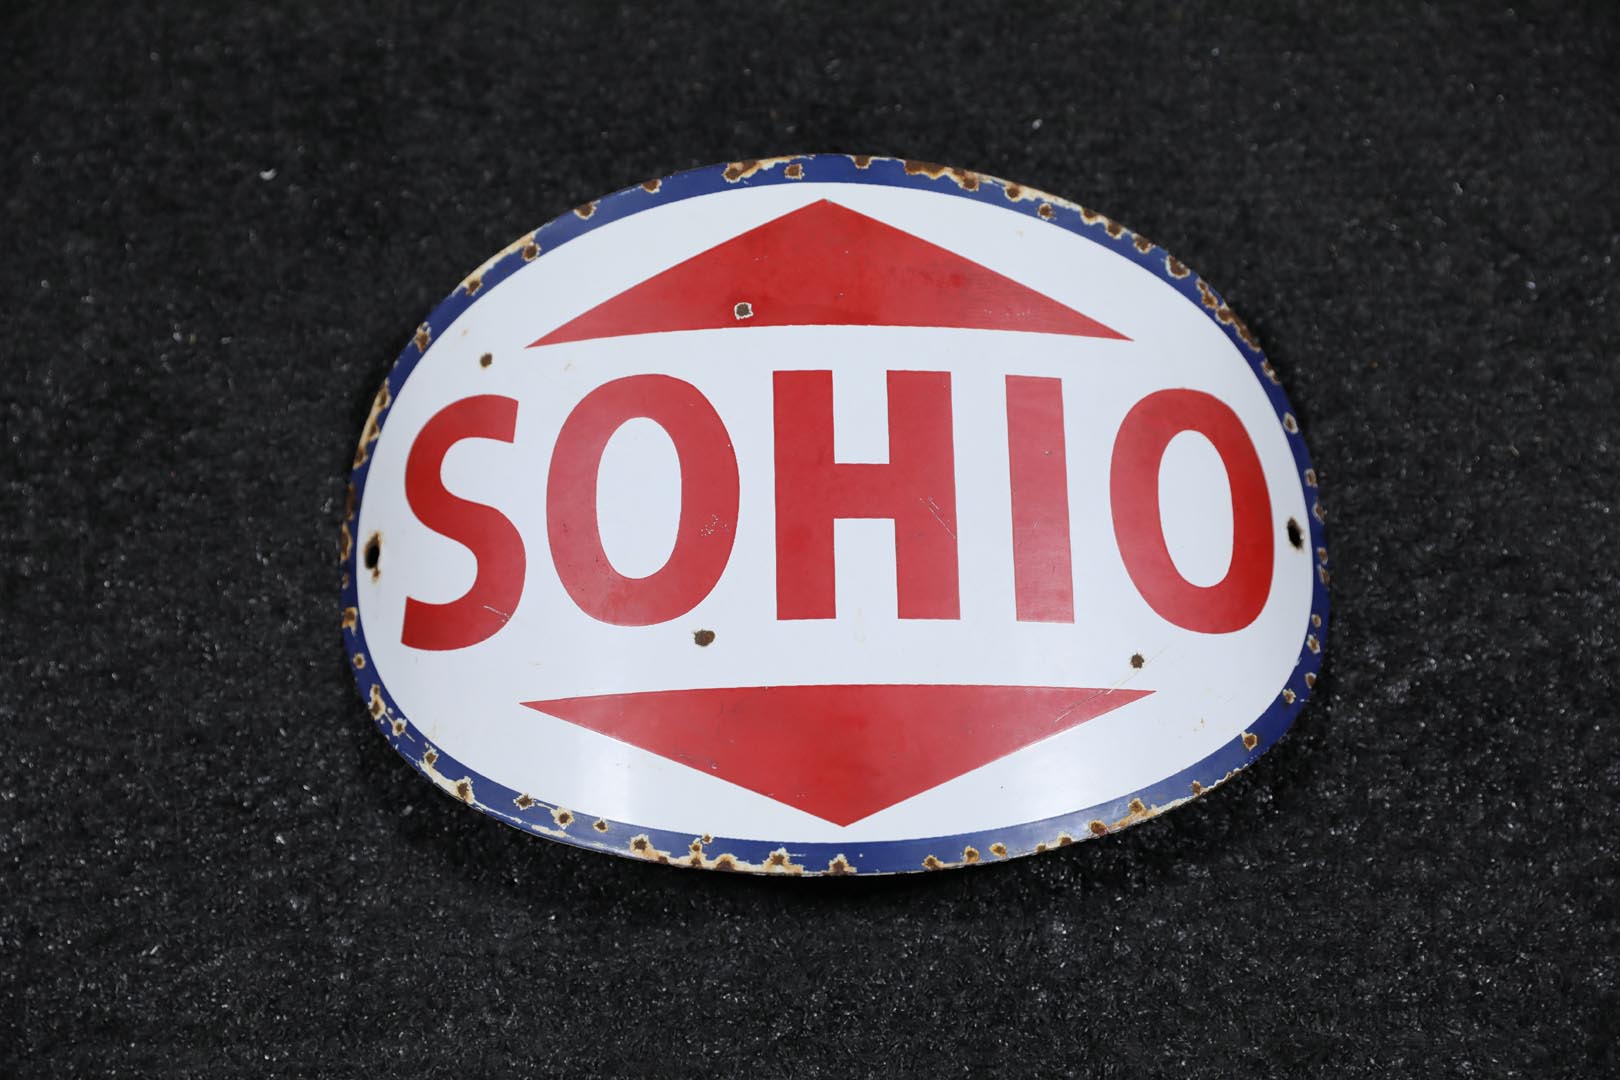 Sohio Gas Single-Sided Porcelain Pump Plate - Curved 